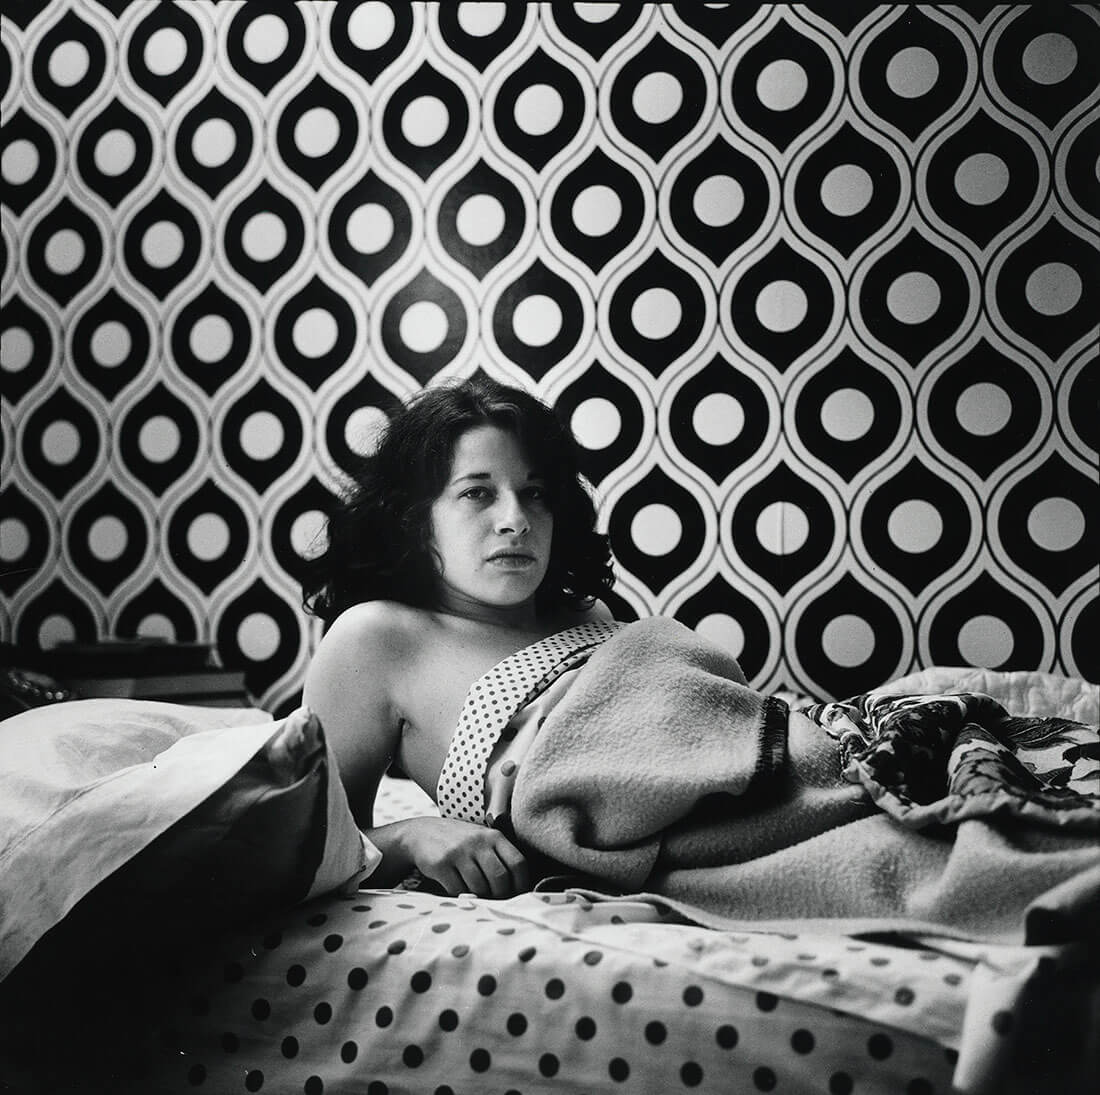 Fran Lebowitz at Home in Morristown, New Jersey